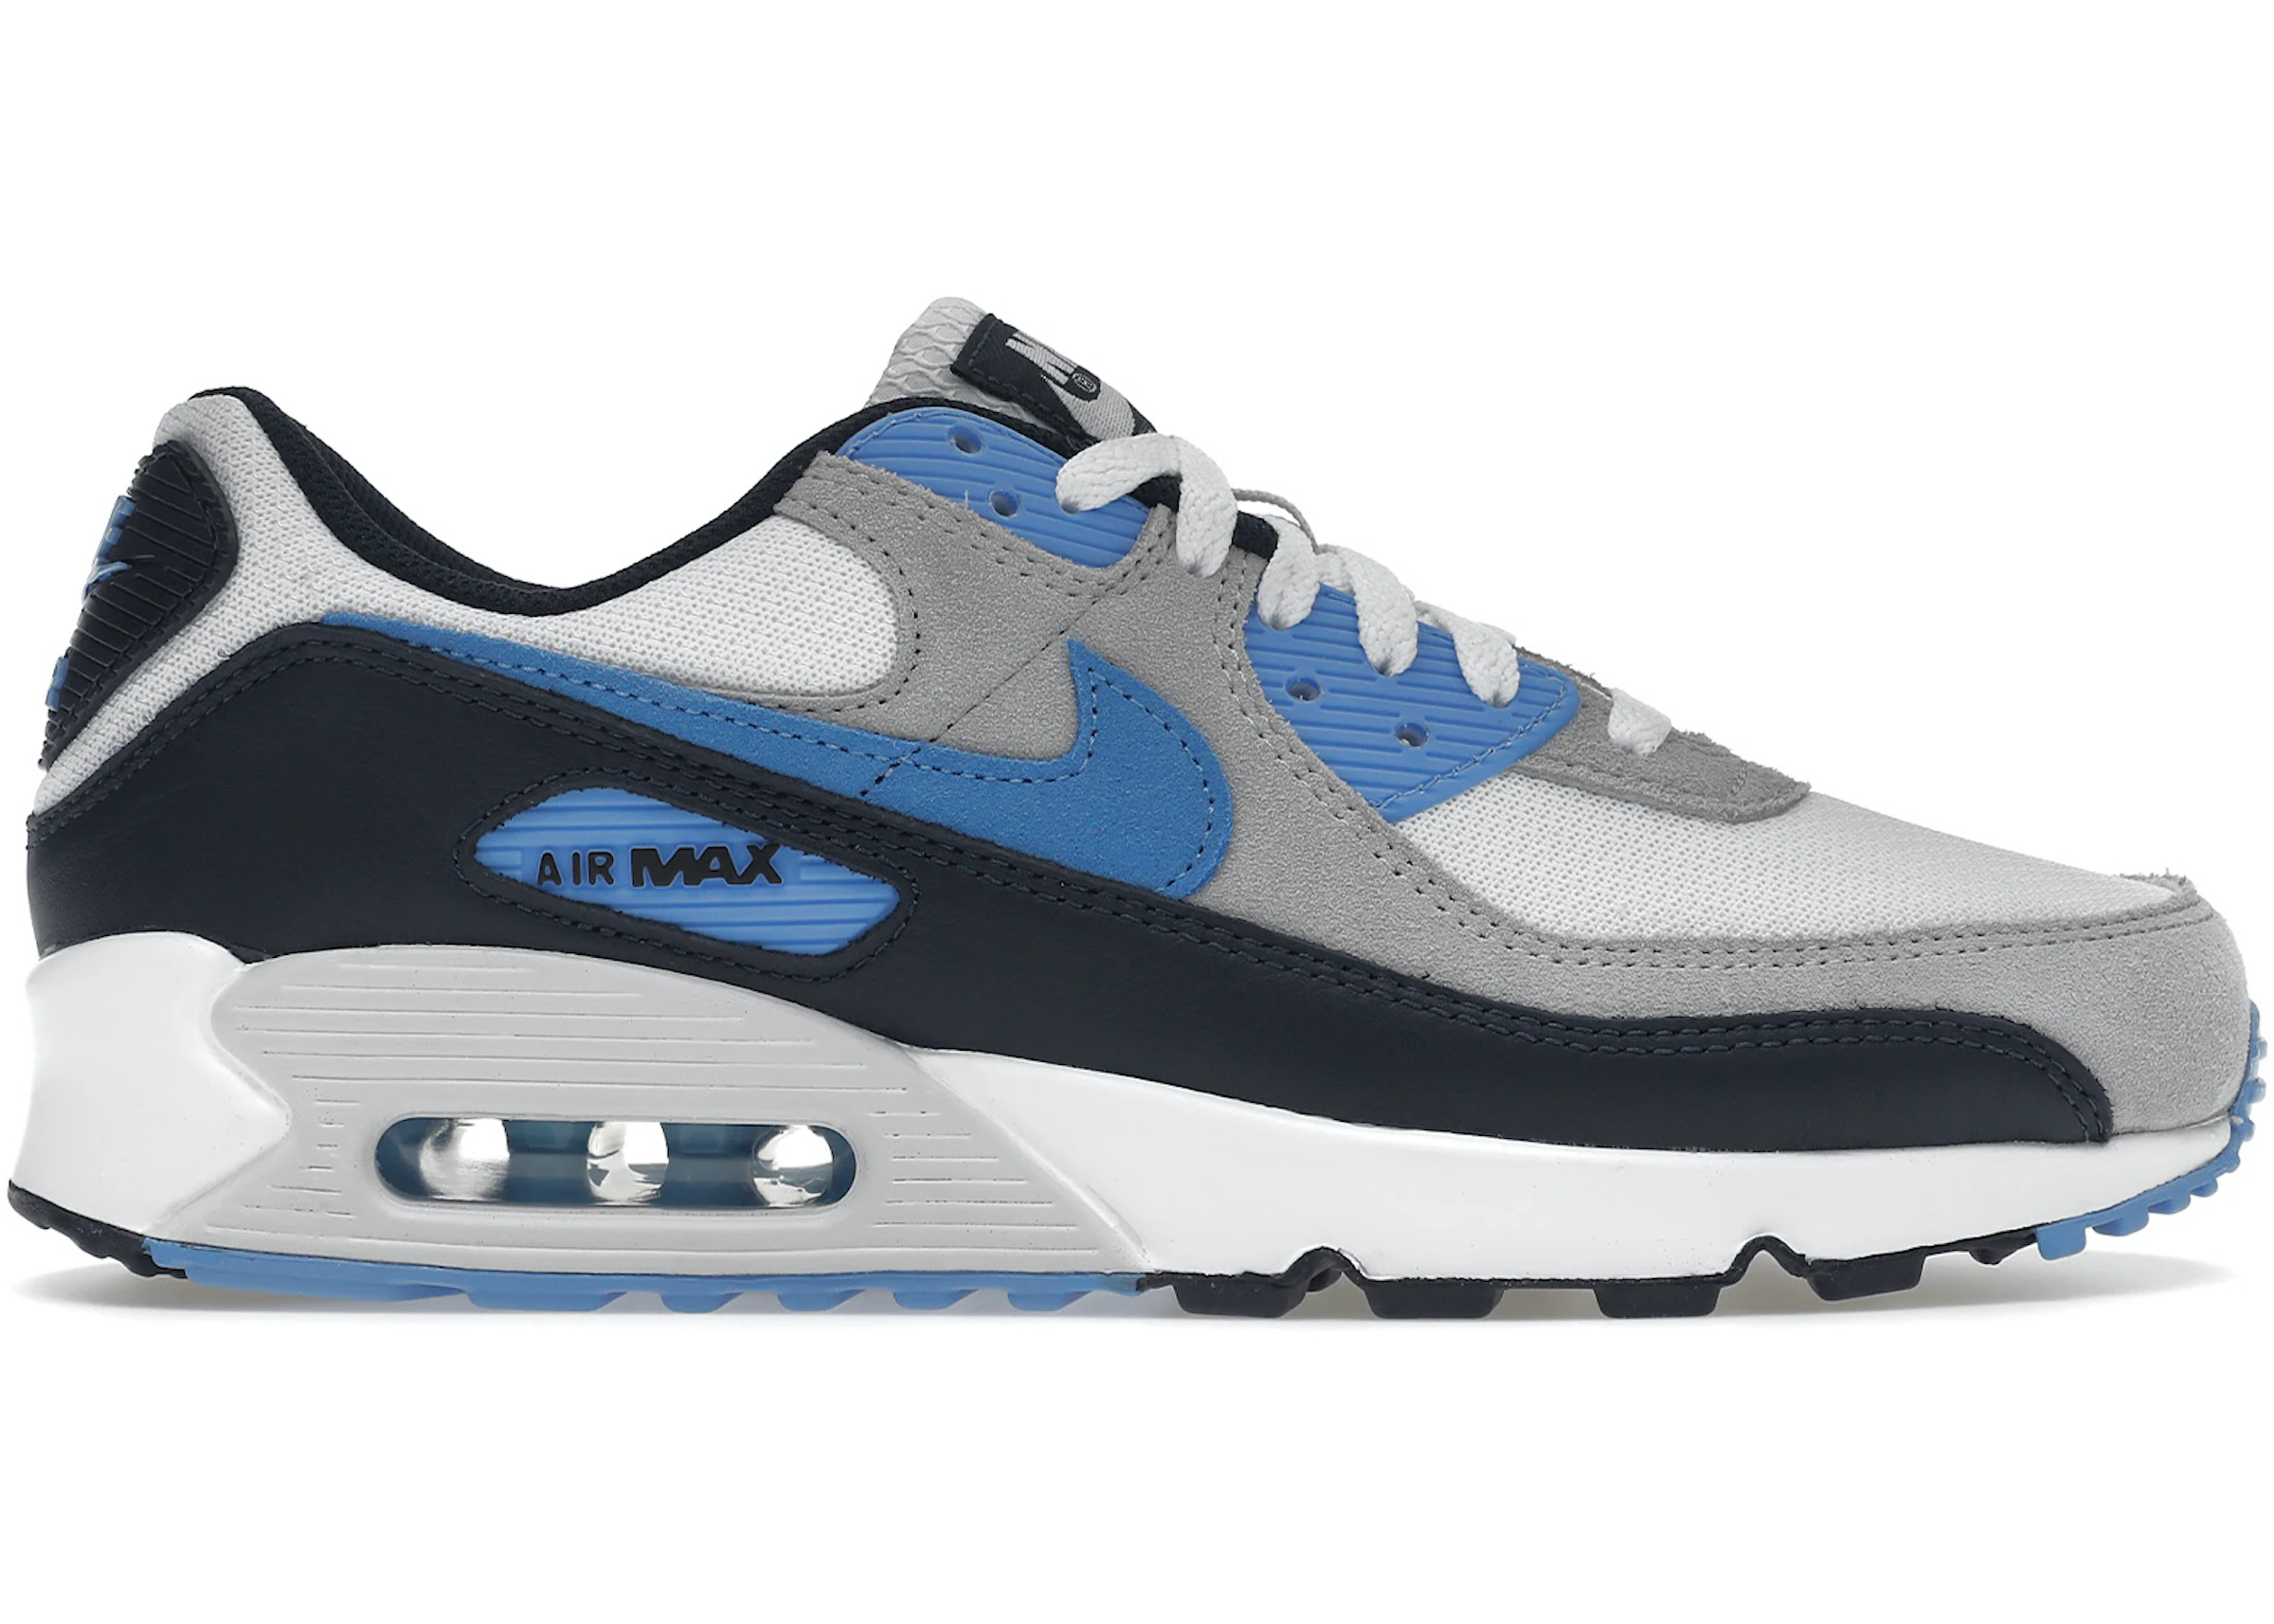 Buy Nike Air Max Shoes & New Sneakers - Stockx